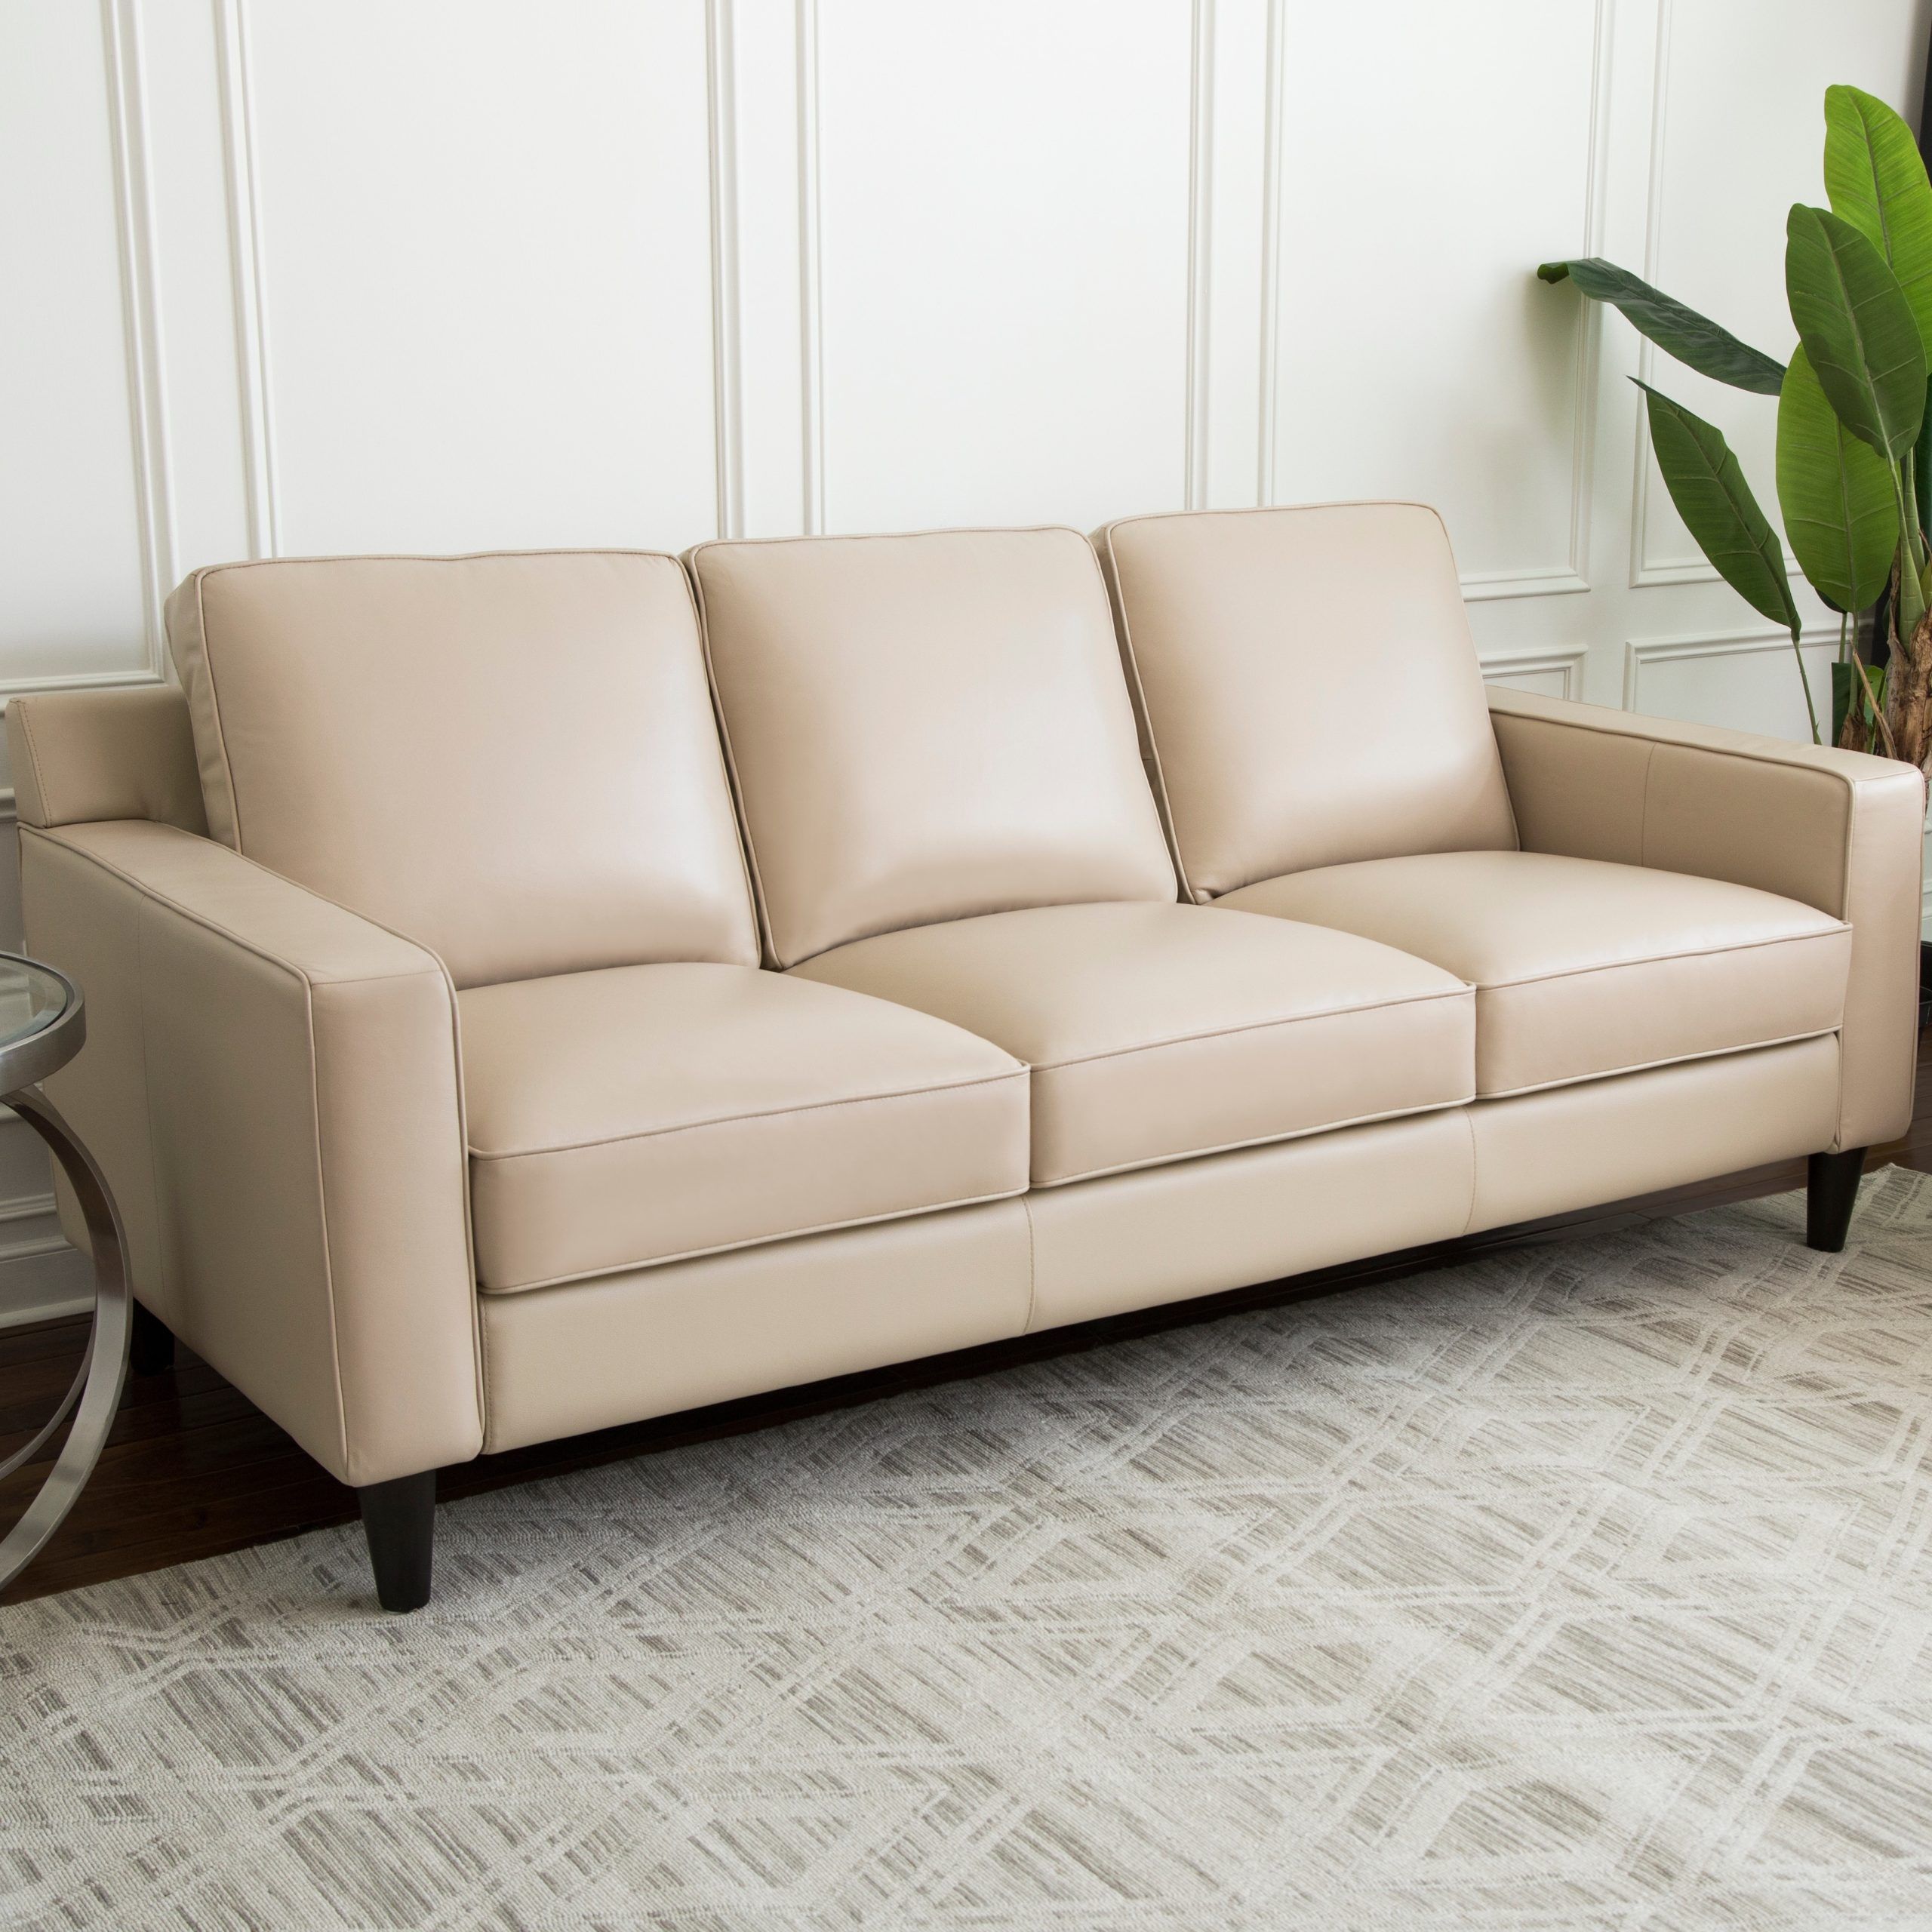 Kathleen Cream Leather 91 Sofa Living Spaces Within Sofas In Cream (Gallery 15 of 20)